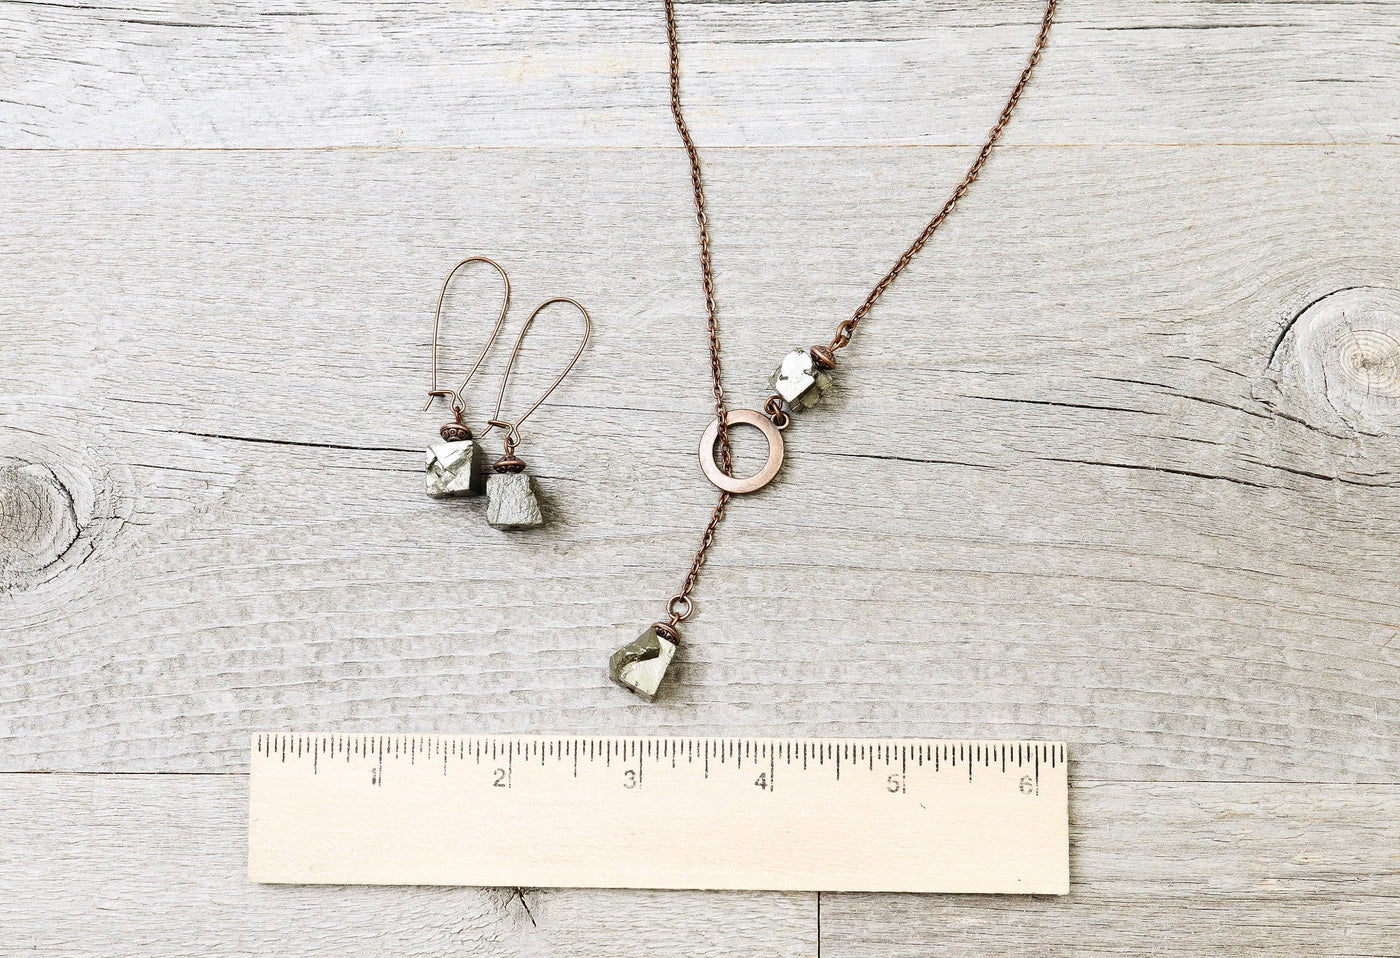 Pyrite Boho Necklace - Cute Lovely Raw Stone Valentine's Day Gift for Her Girlfriend Sister Daughter Elegant Gemstone Pendant Jewelry Set